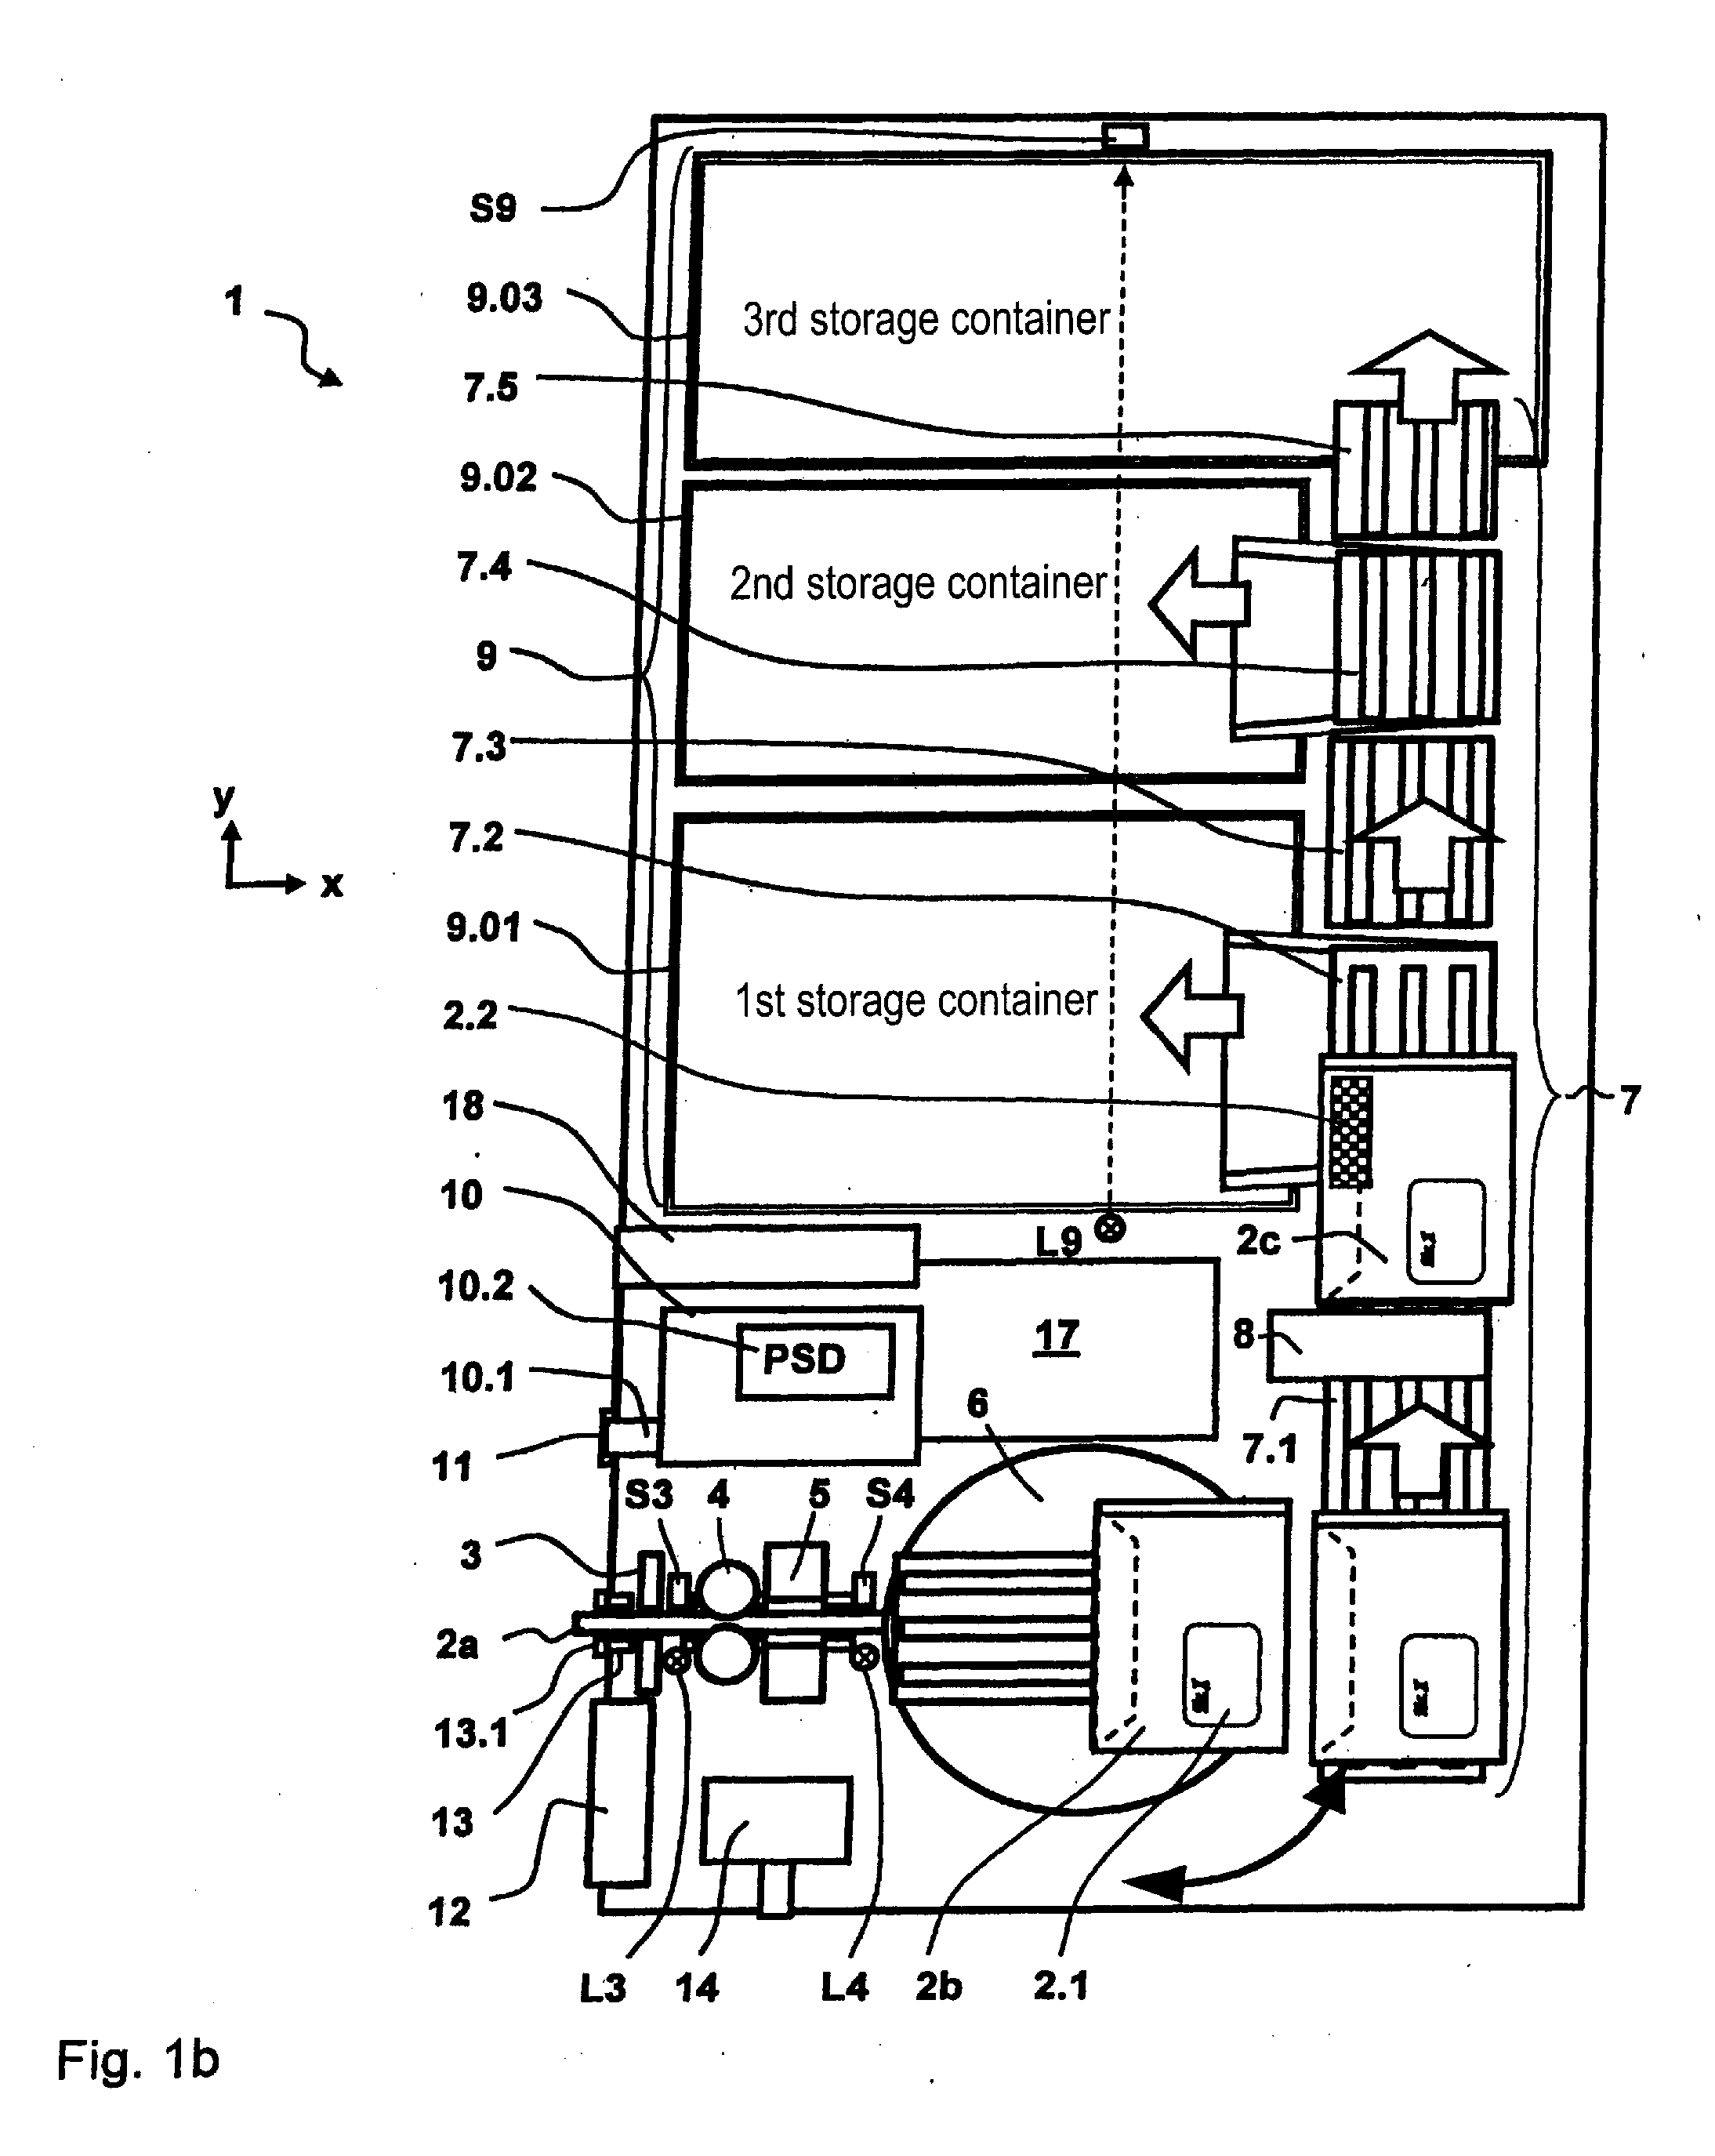 Device and method for accepting mail pieces